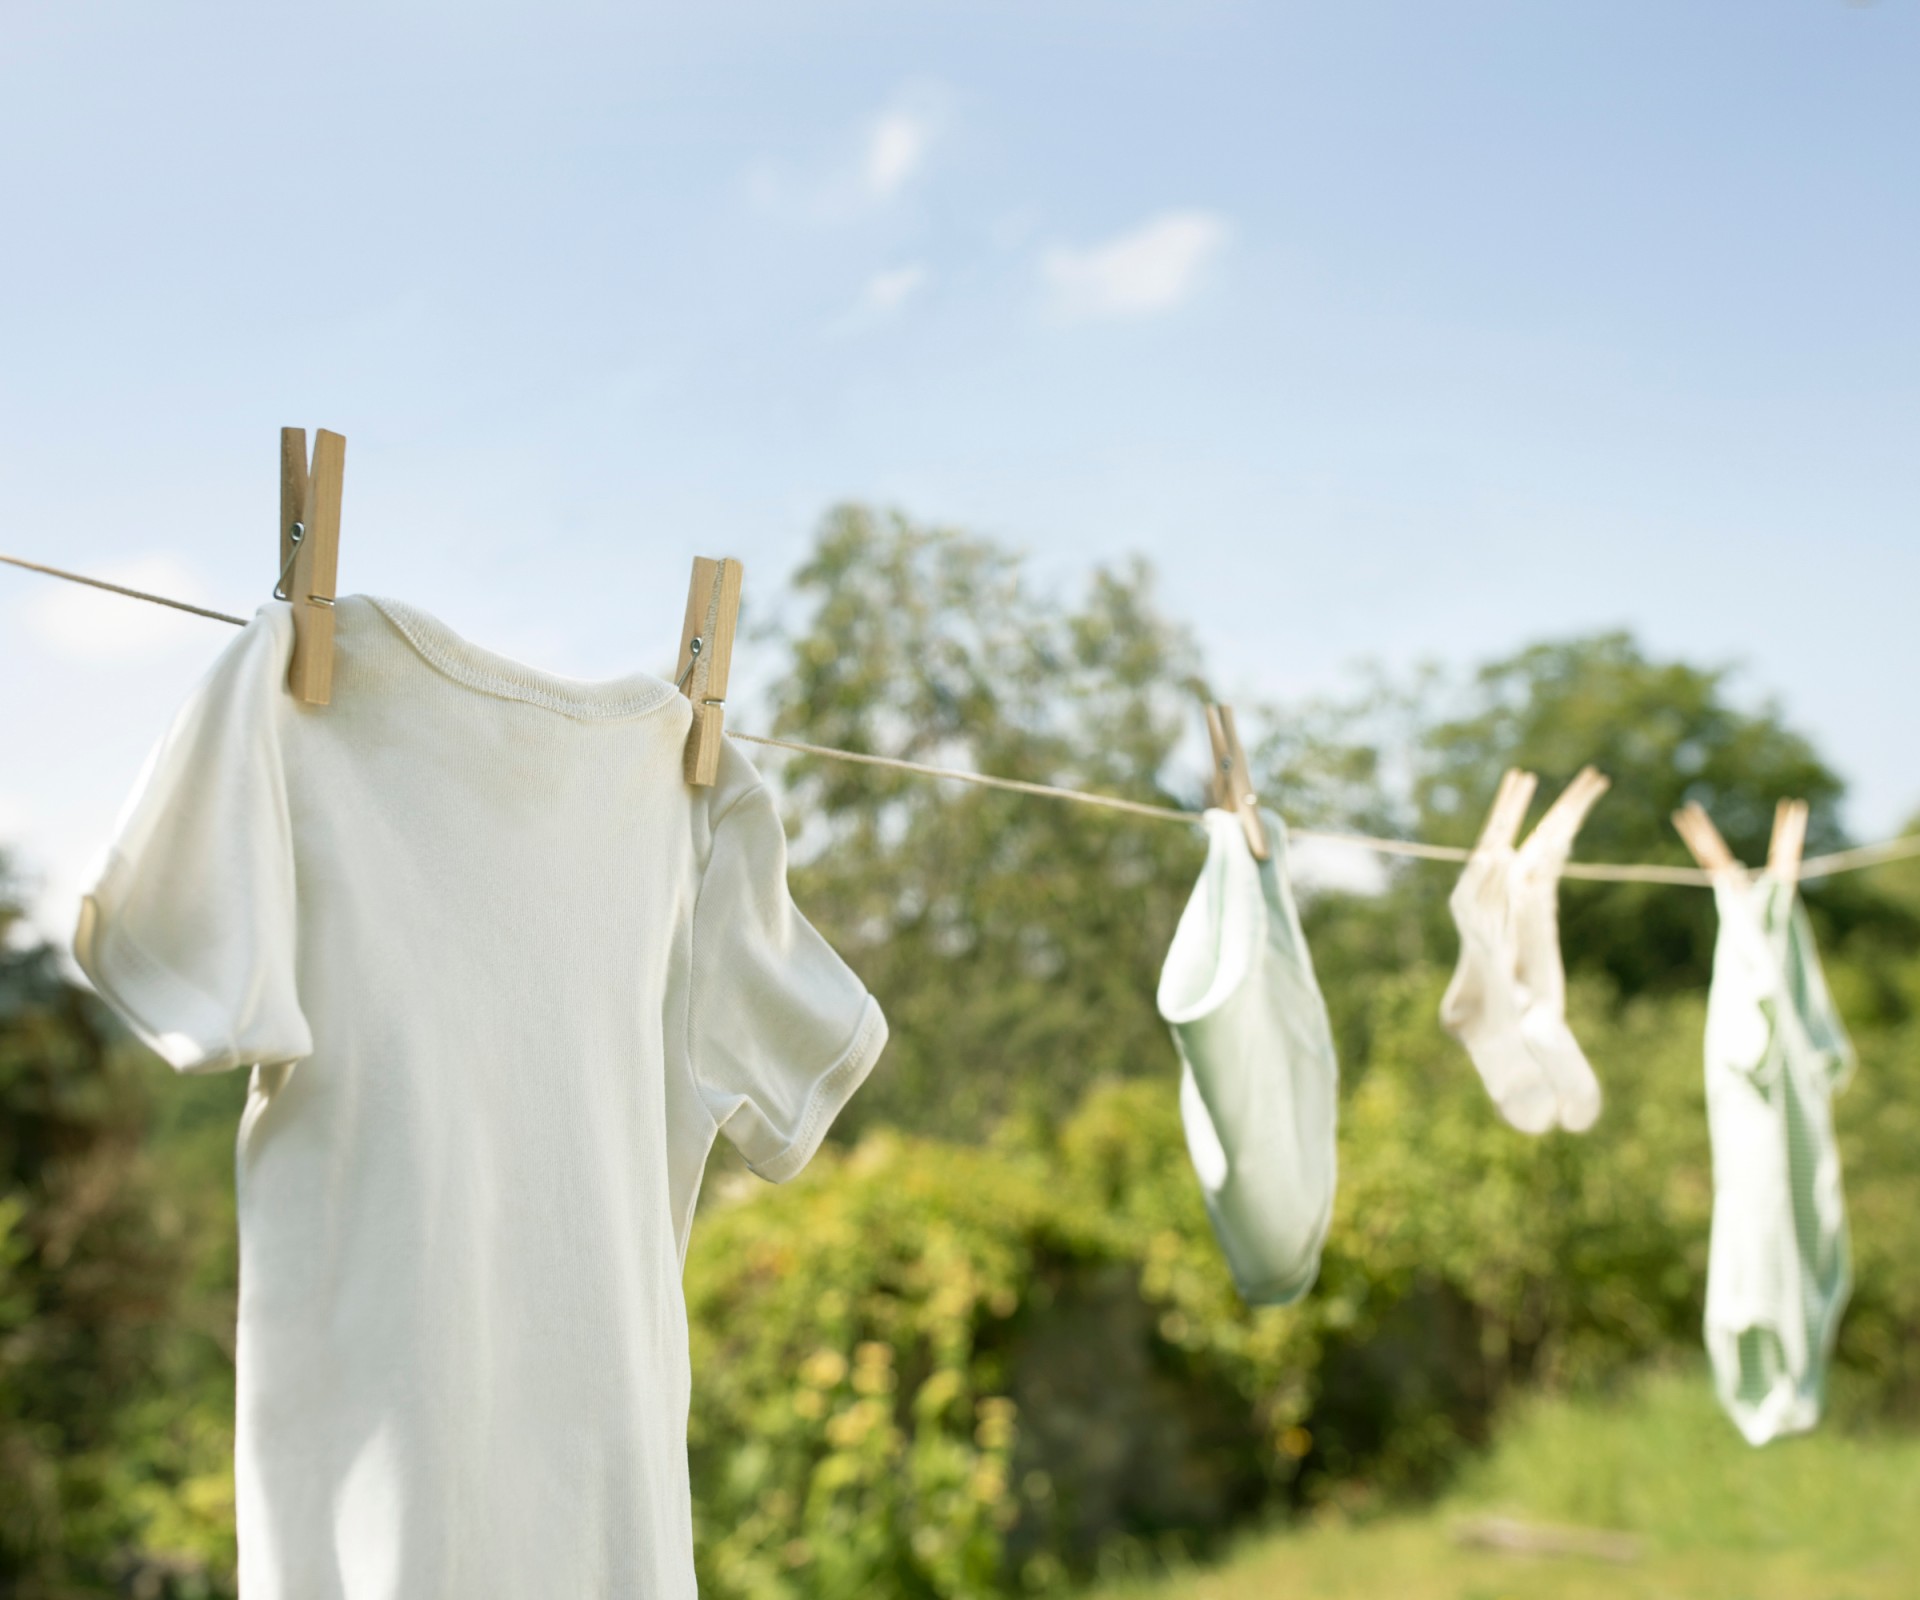 White clothes hang on a clothesline outside under blue sky	